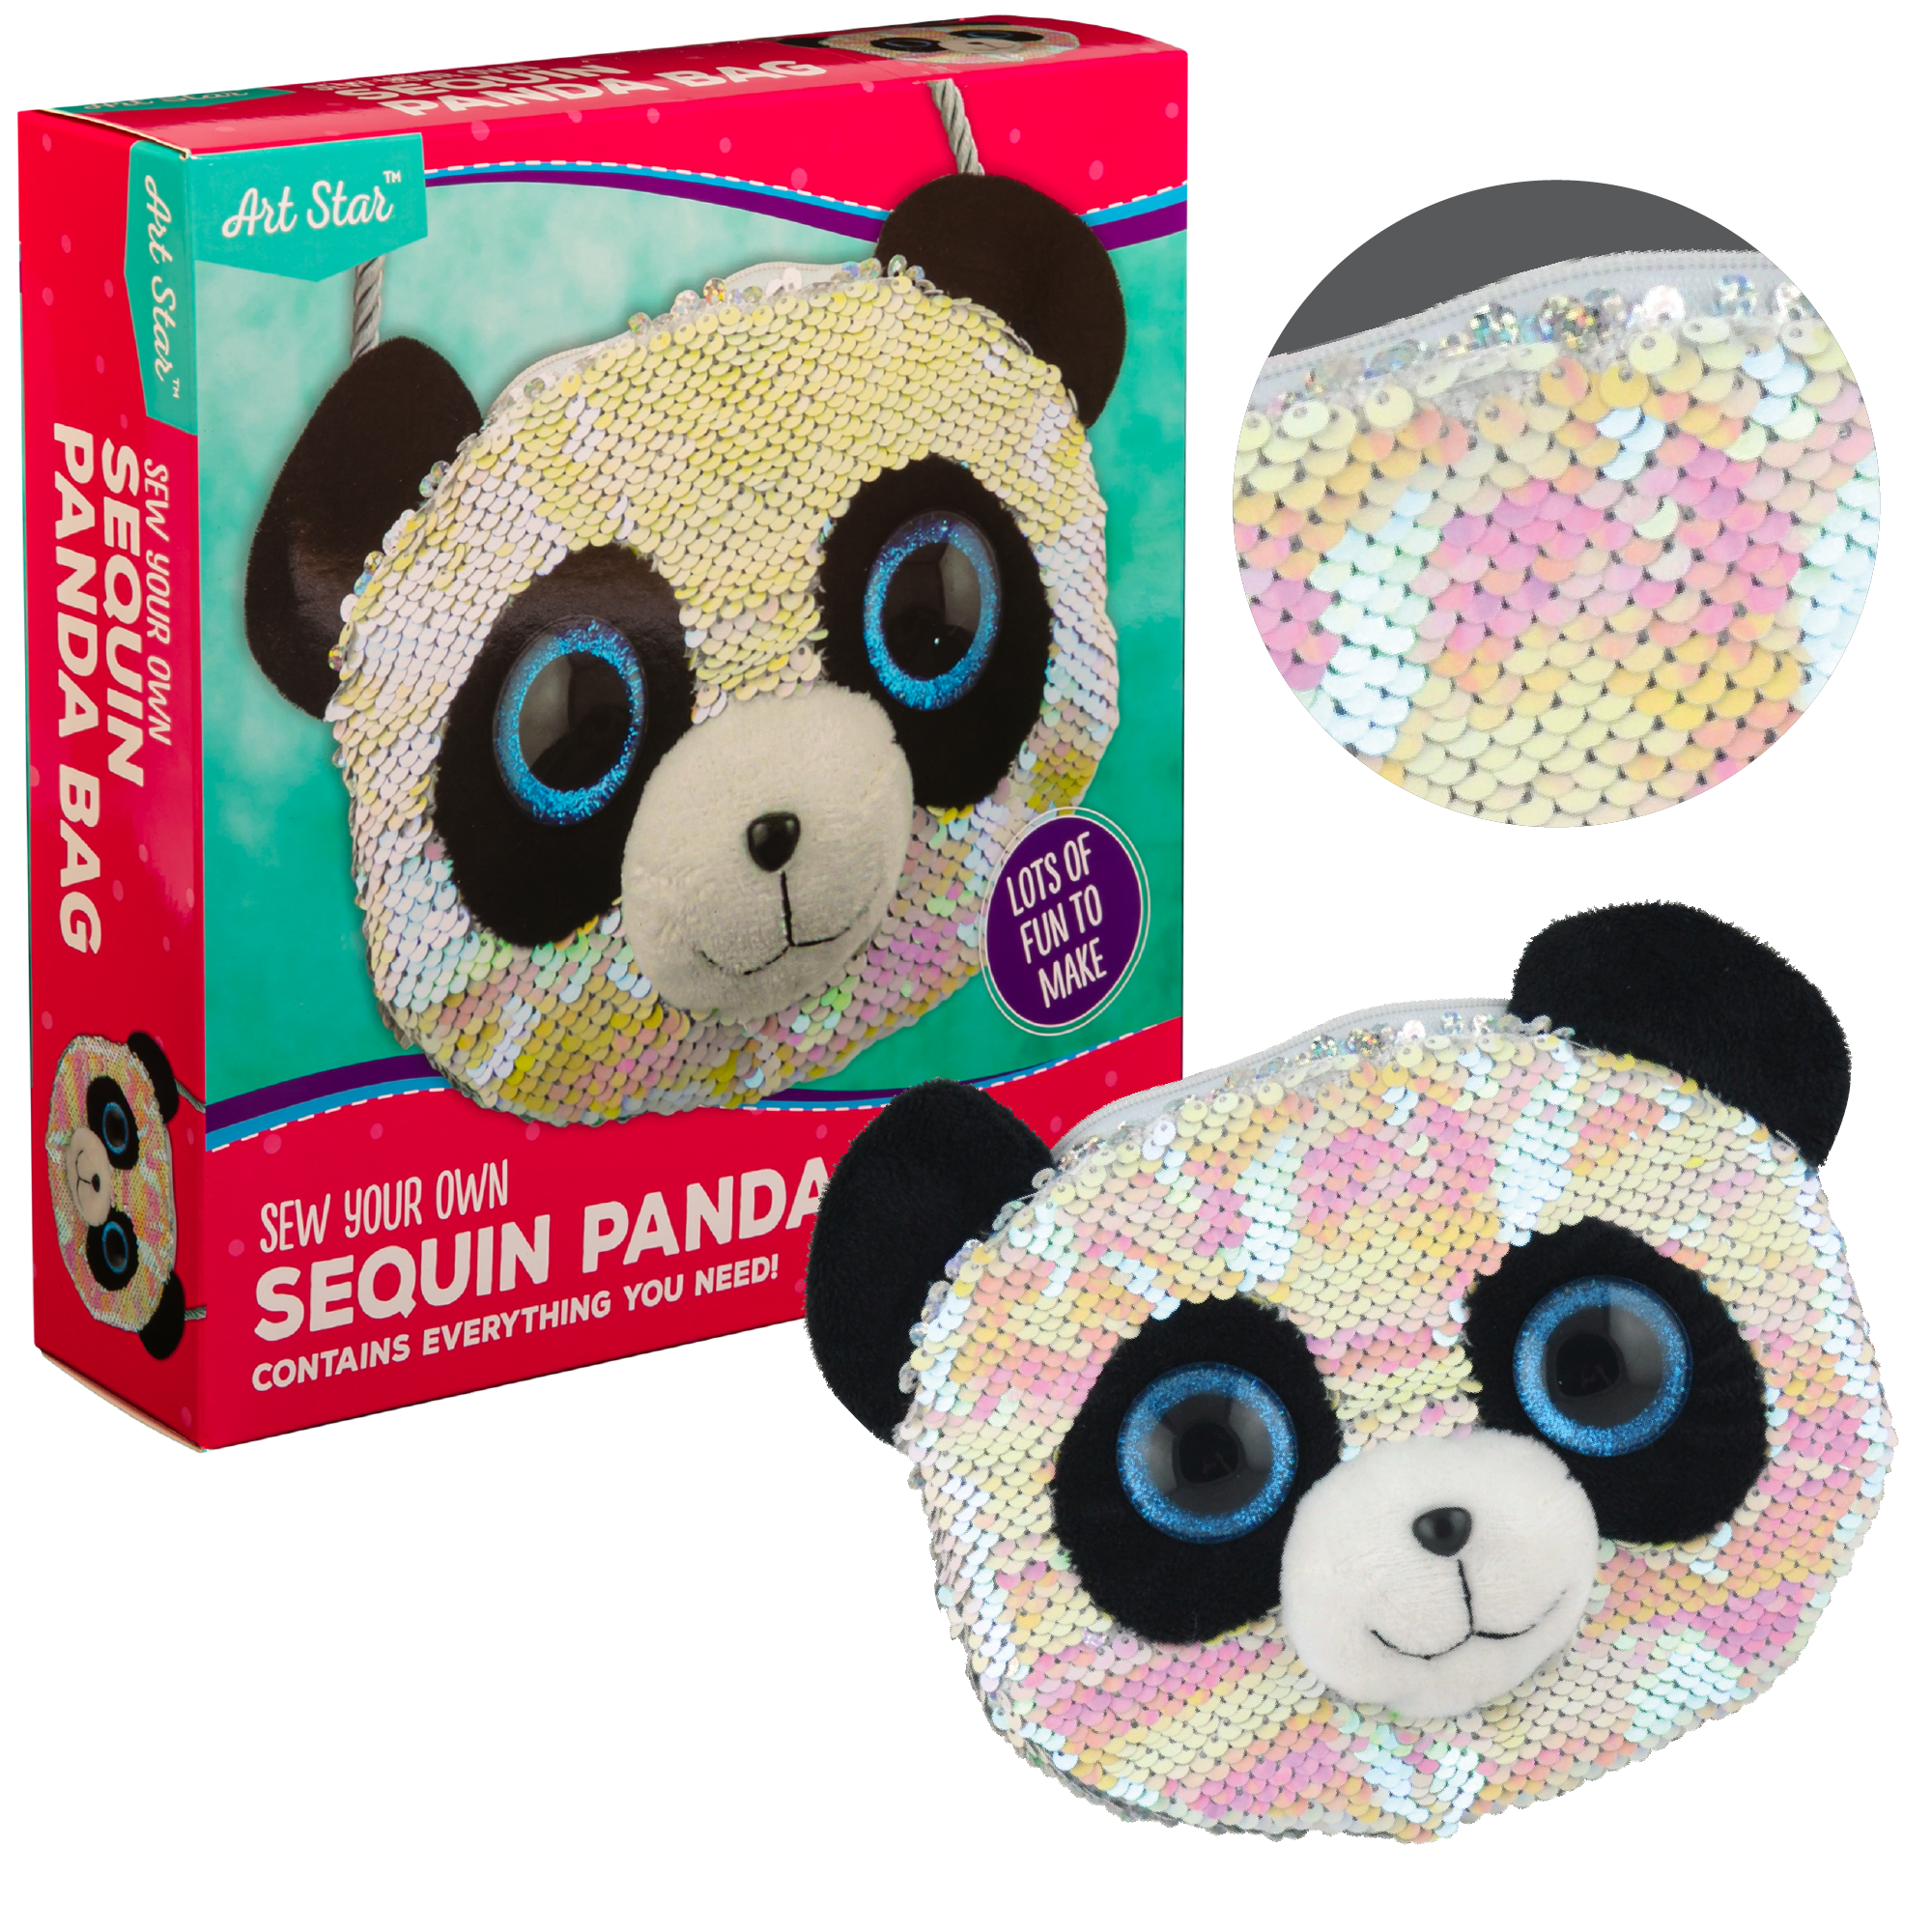 Image of Make Your Own Sequin Panda Bag Activity Kit